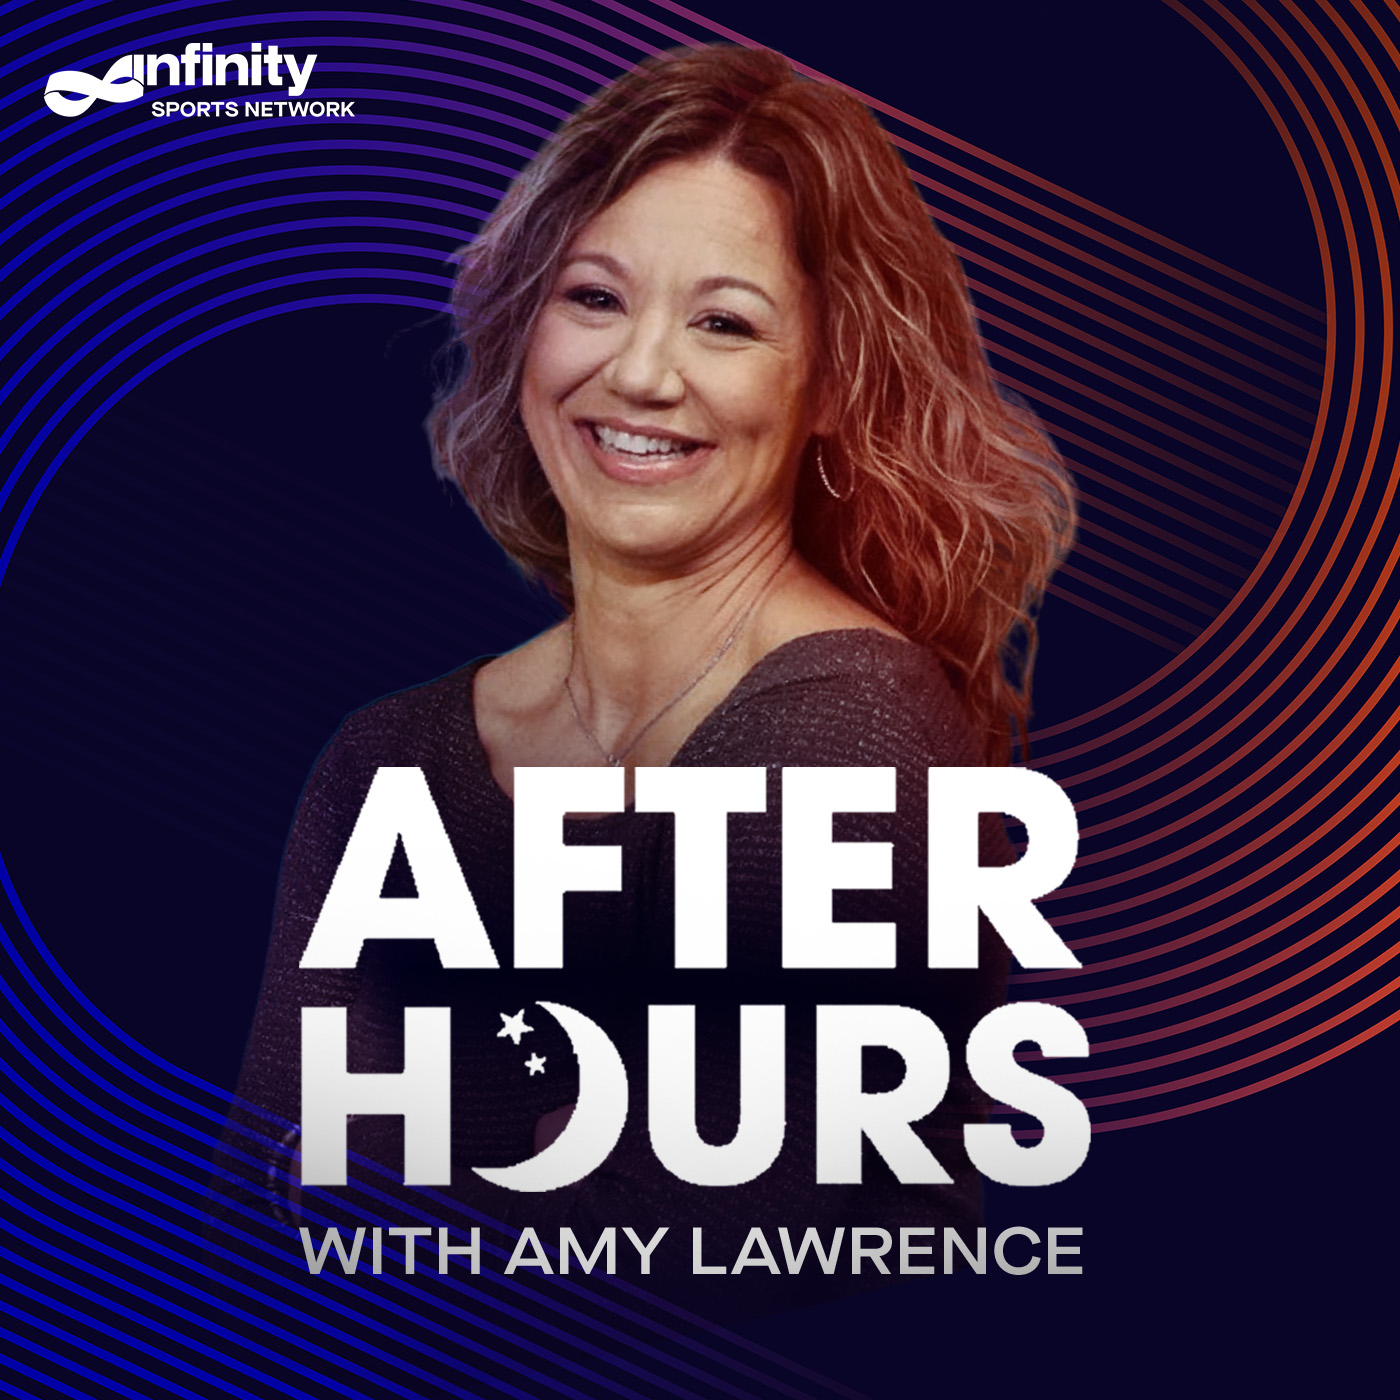 11-2-21 After Hours with Amy Lawrence PODCAST: Hour 1